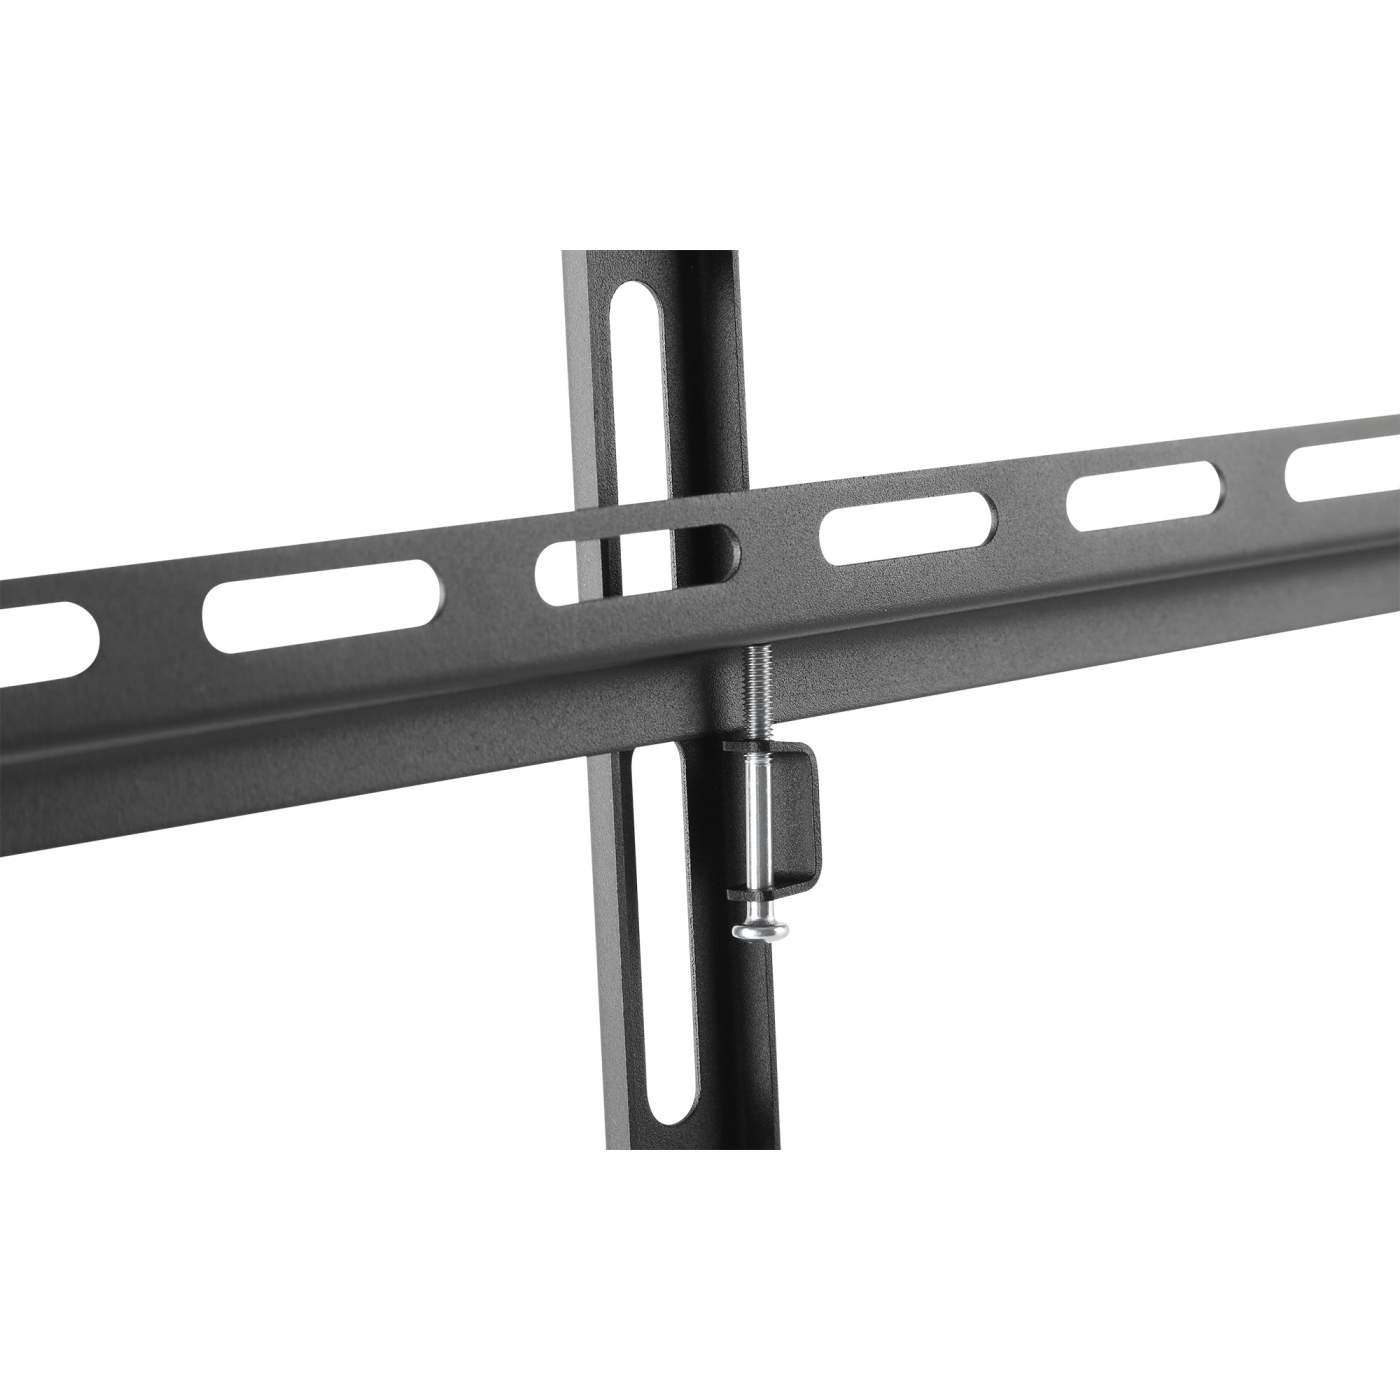 Low-Profile TV Tilting Wall Mount Image 12